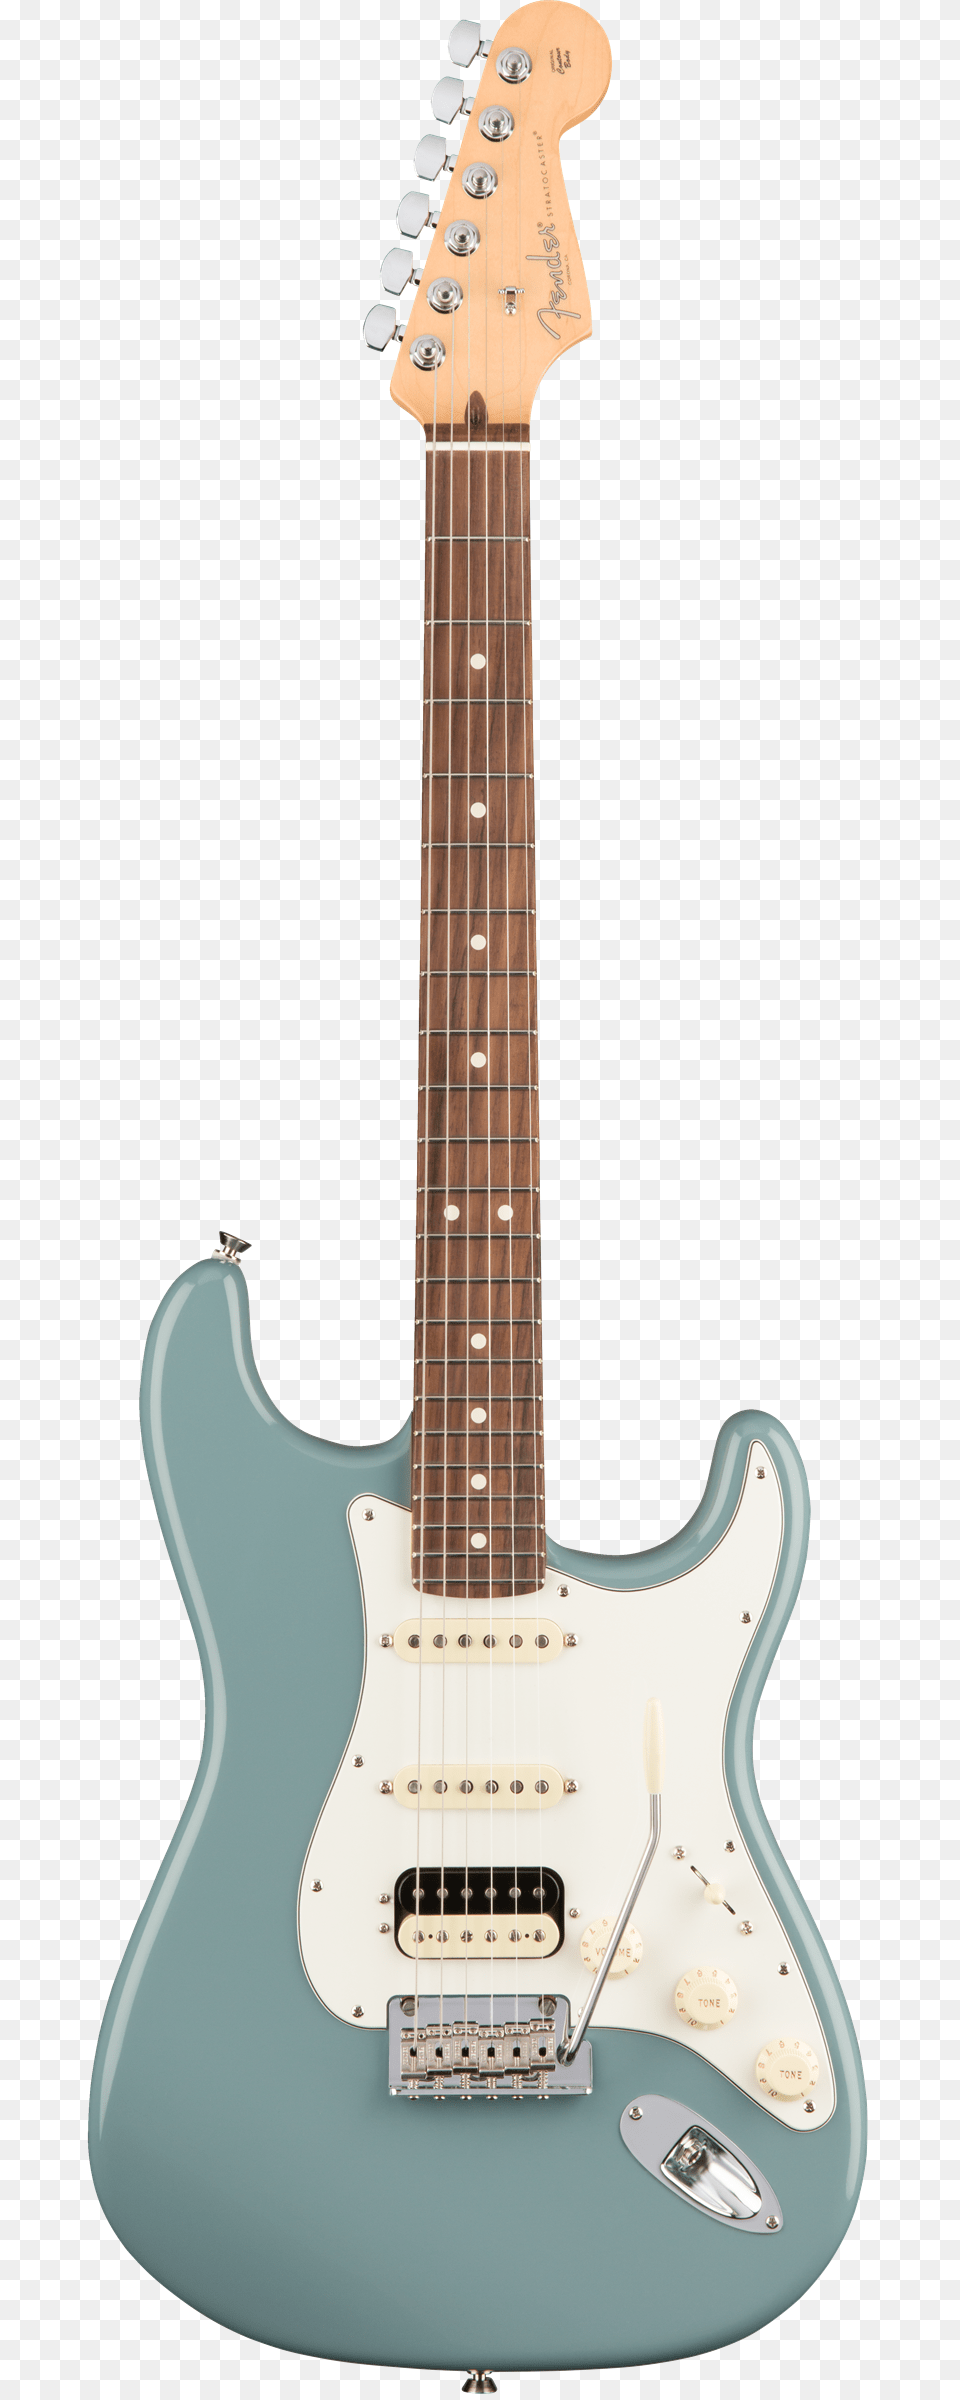 Fender American Professional Stratocaster Hss Shawbucker Fender Player Series Stratocaster Black, Electric Guitar, Guitar, Musical Instrument, Bass Guitar Png Image